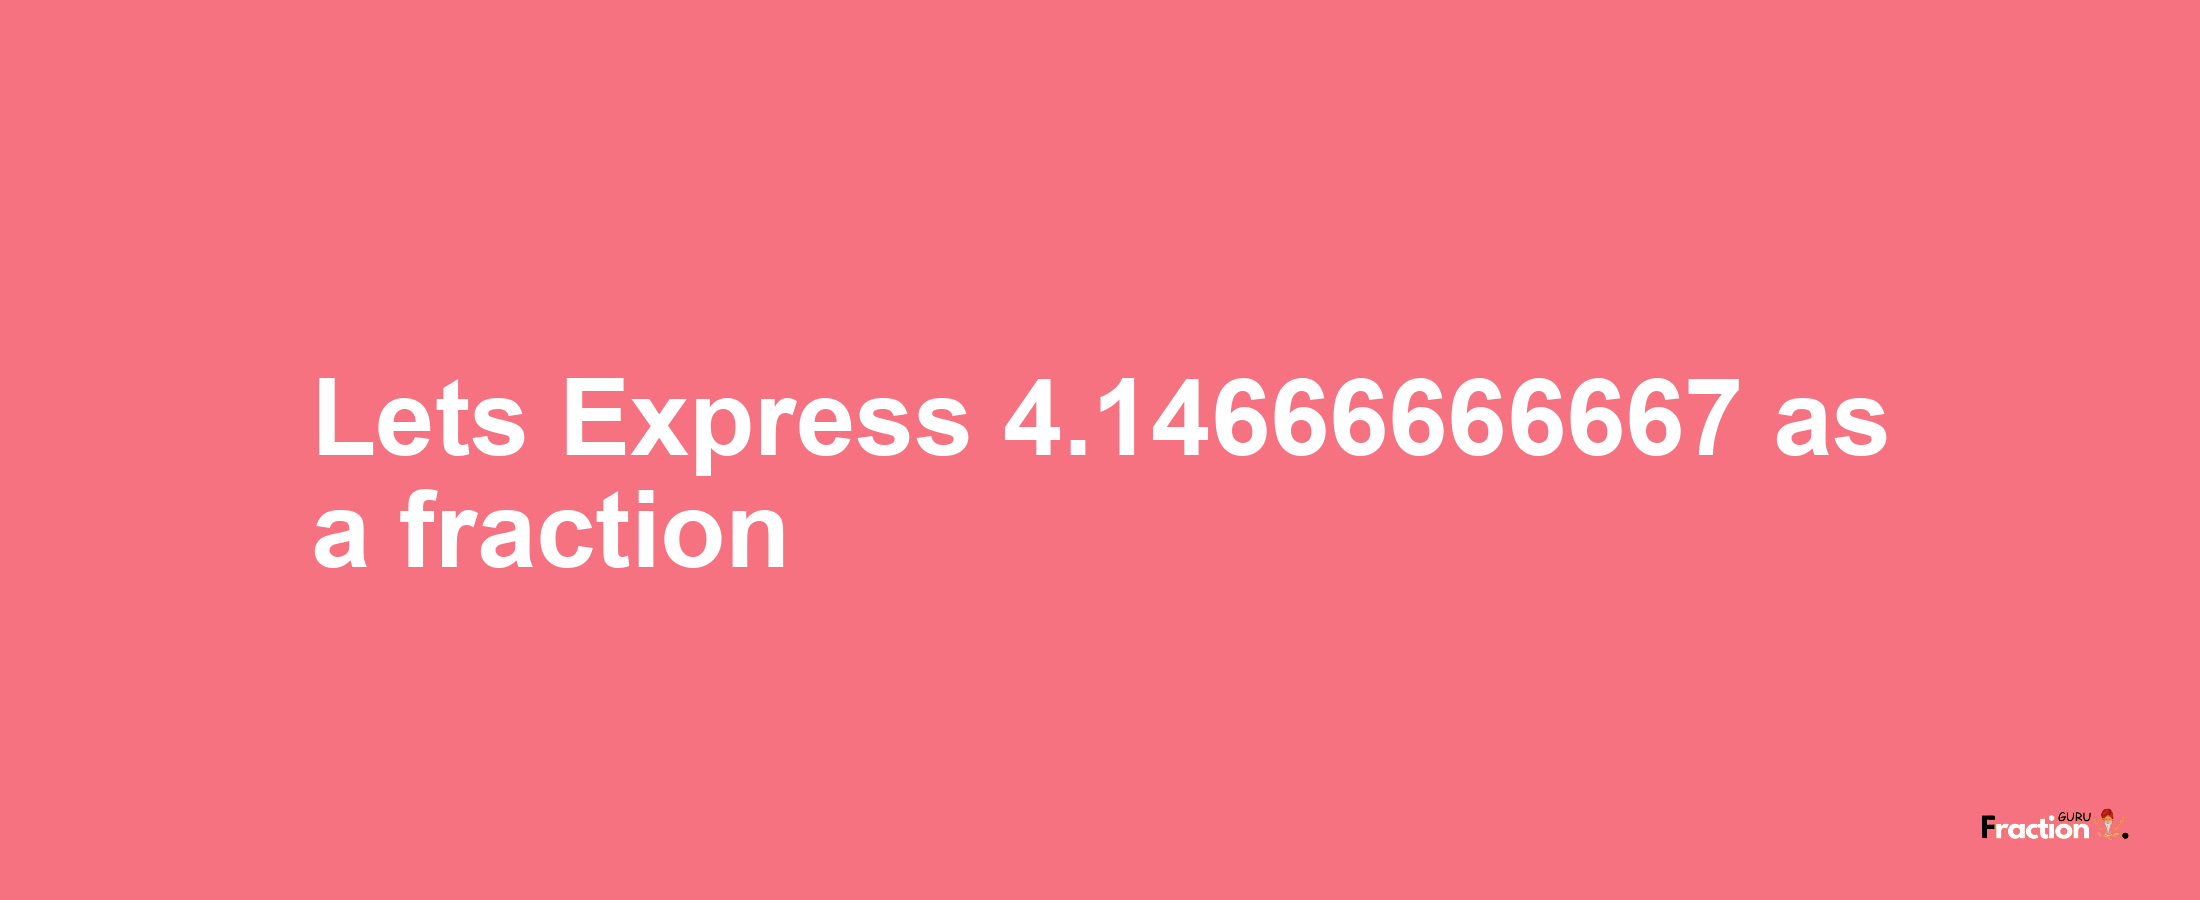 Lets Express 4.14666666667 as afraction